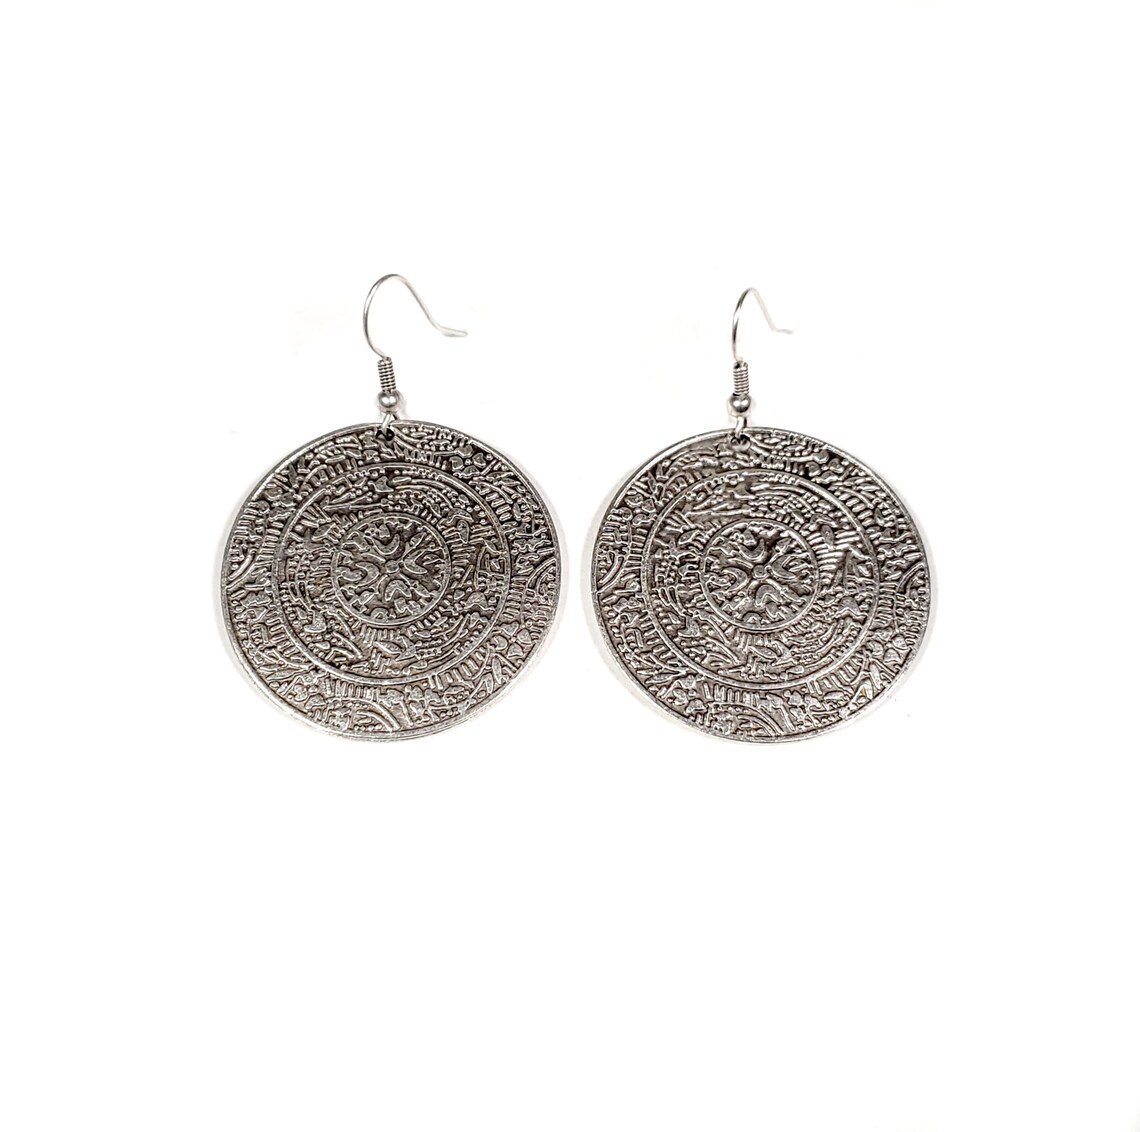 Hand Made Bohemian Pewter Earrings Plated in 925 Silver, Nickel Free ...